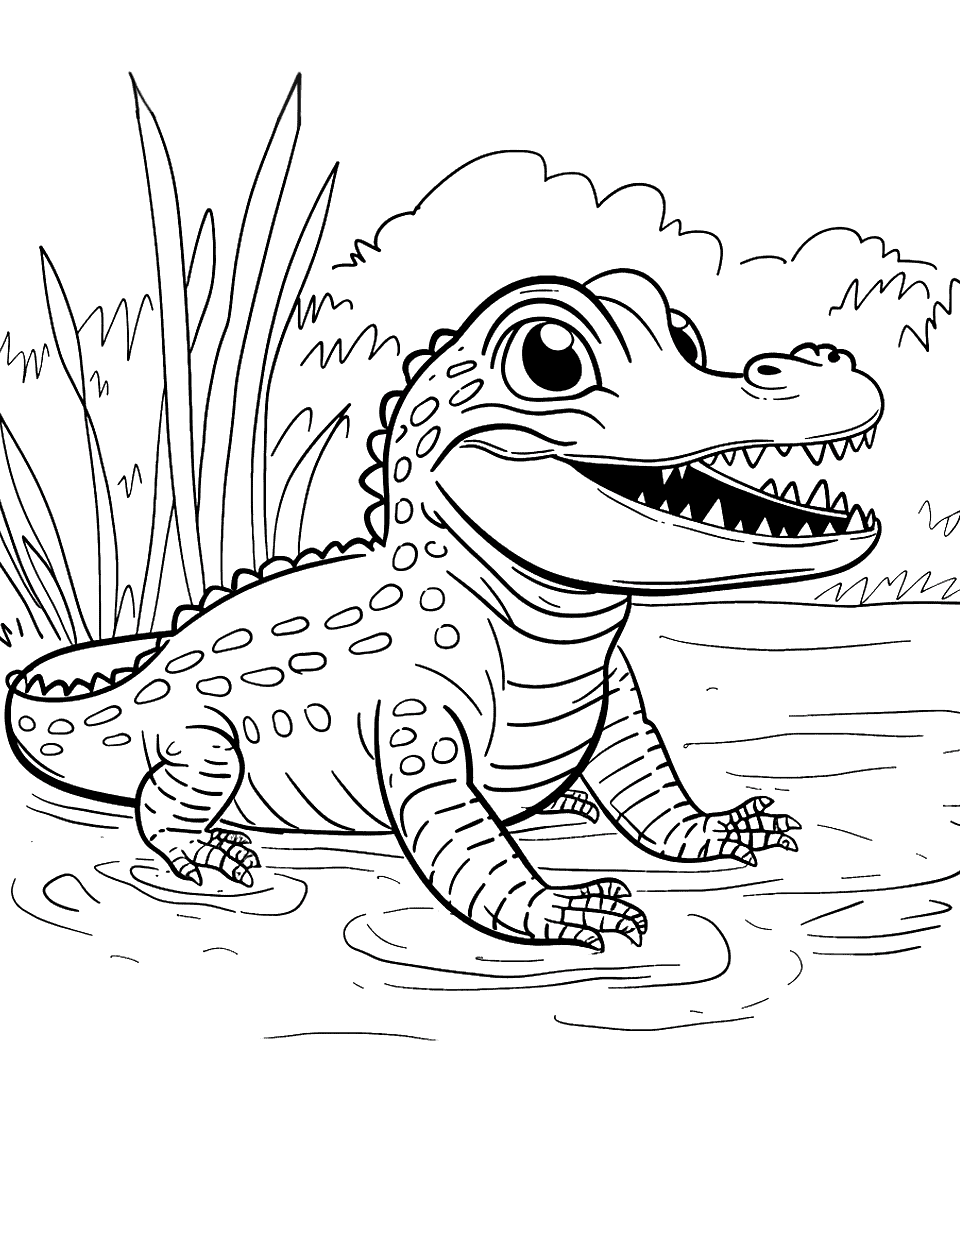 Cute Baby Crocodile Coloring Page - A small, adorable baby crocodile with a wide smile sitting by a pond.